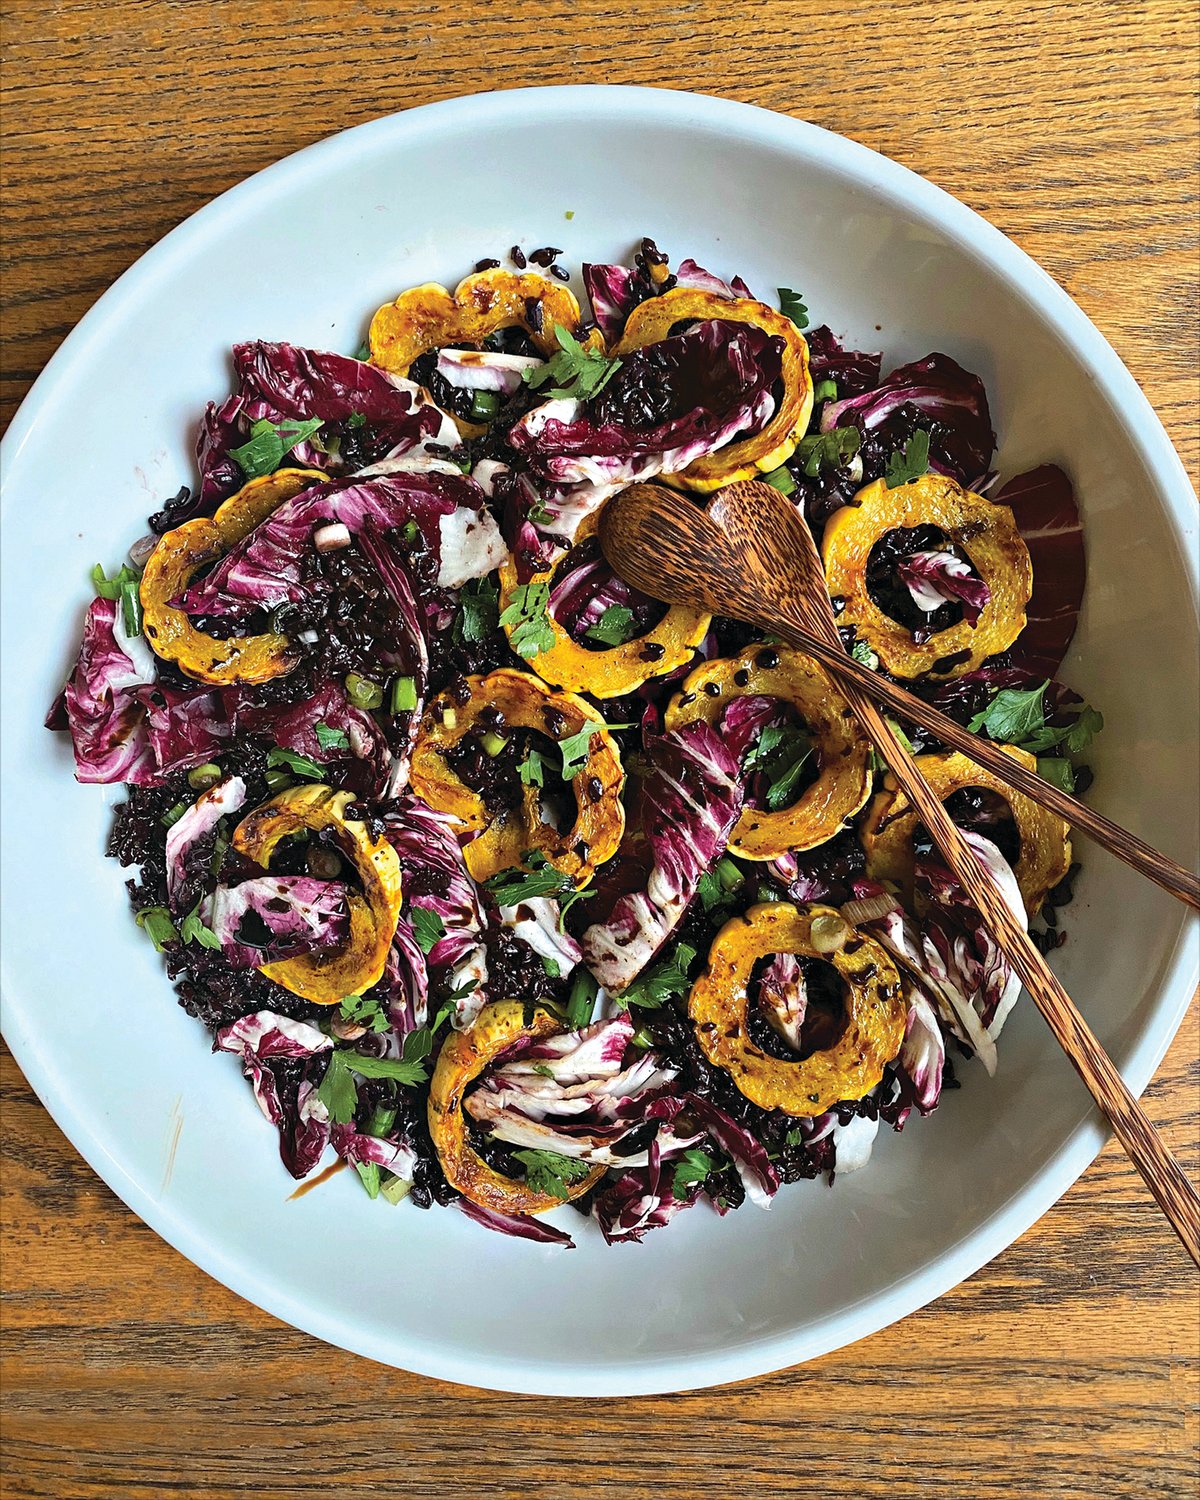 This vibrant salad is a layered with toothsome nutty black rice, juicy-crisp radicchio leaves, and spice-roasted delicata squash rings.